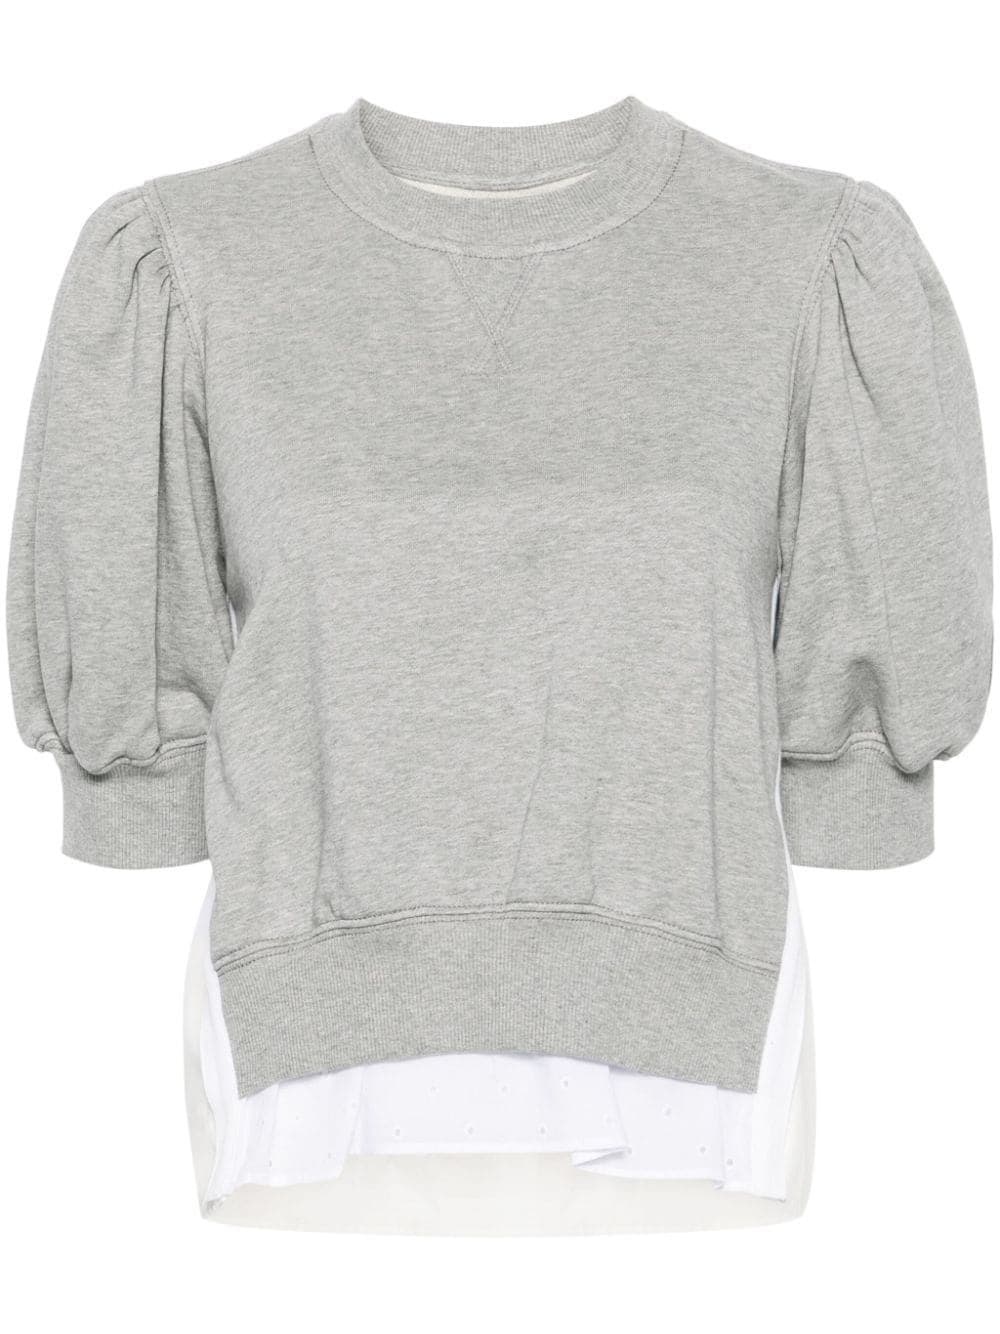 broderie-anglaise cropped sweatshirt - 1